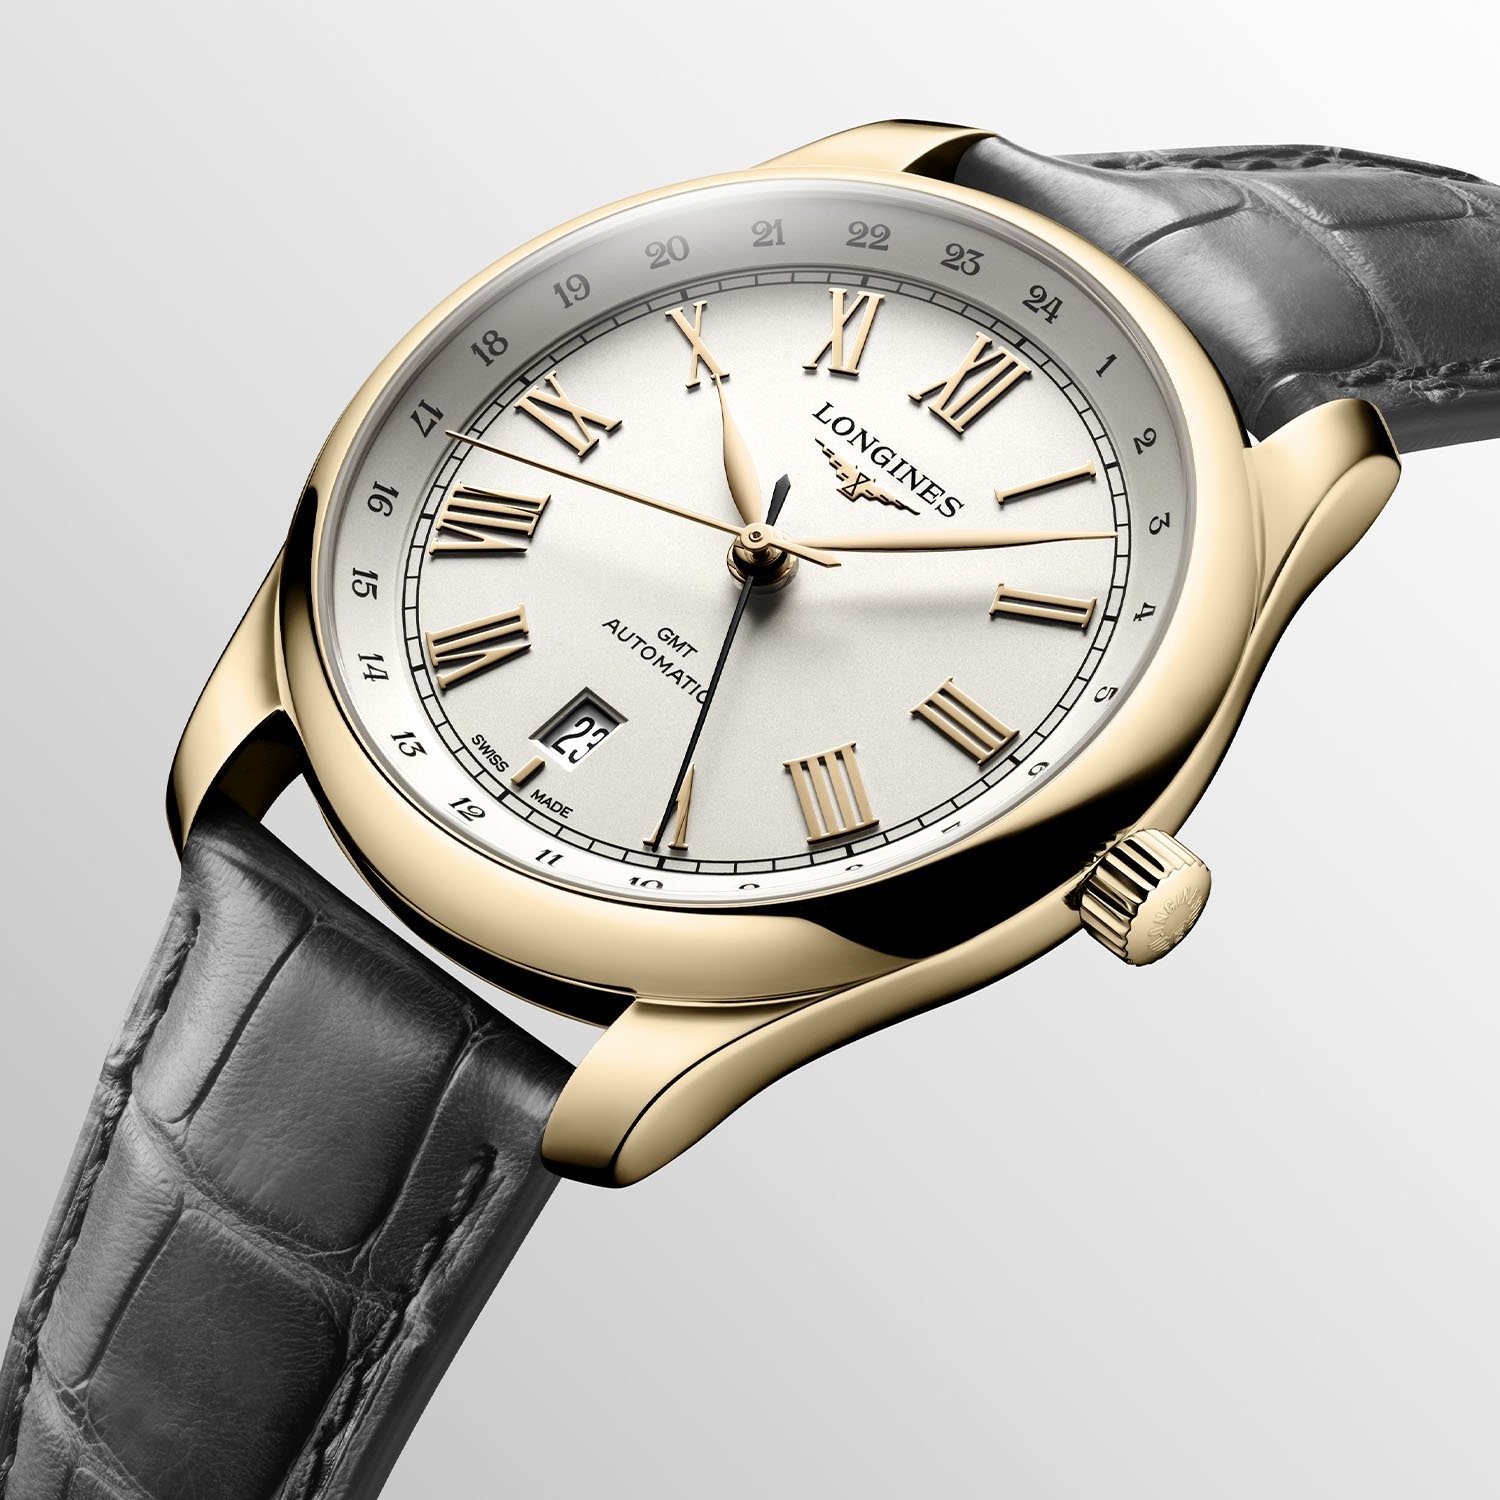 Longines introduces new GMT models in gold